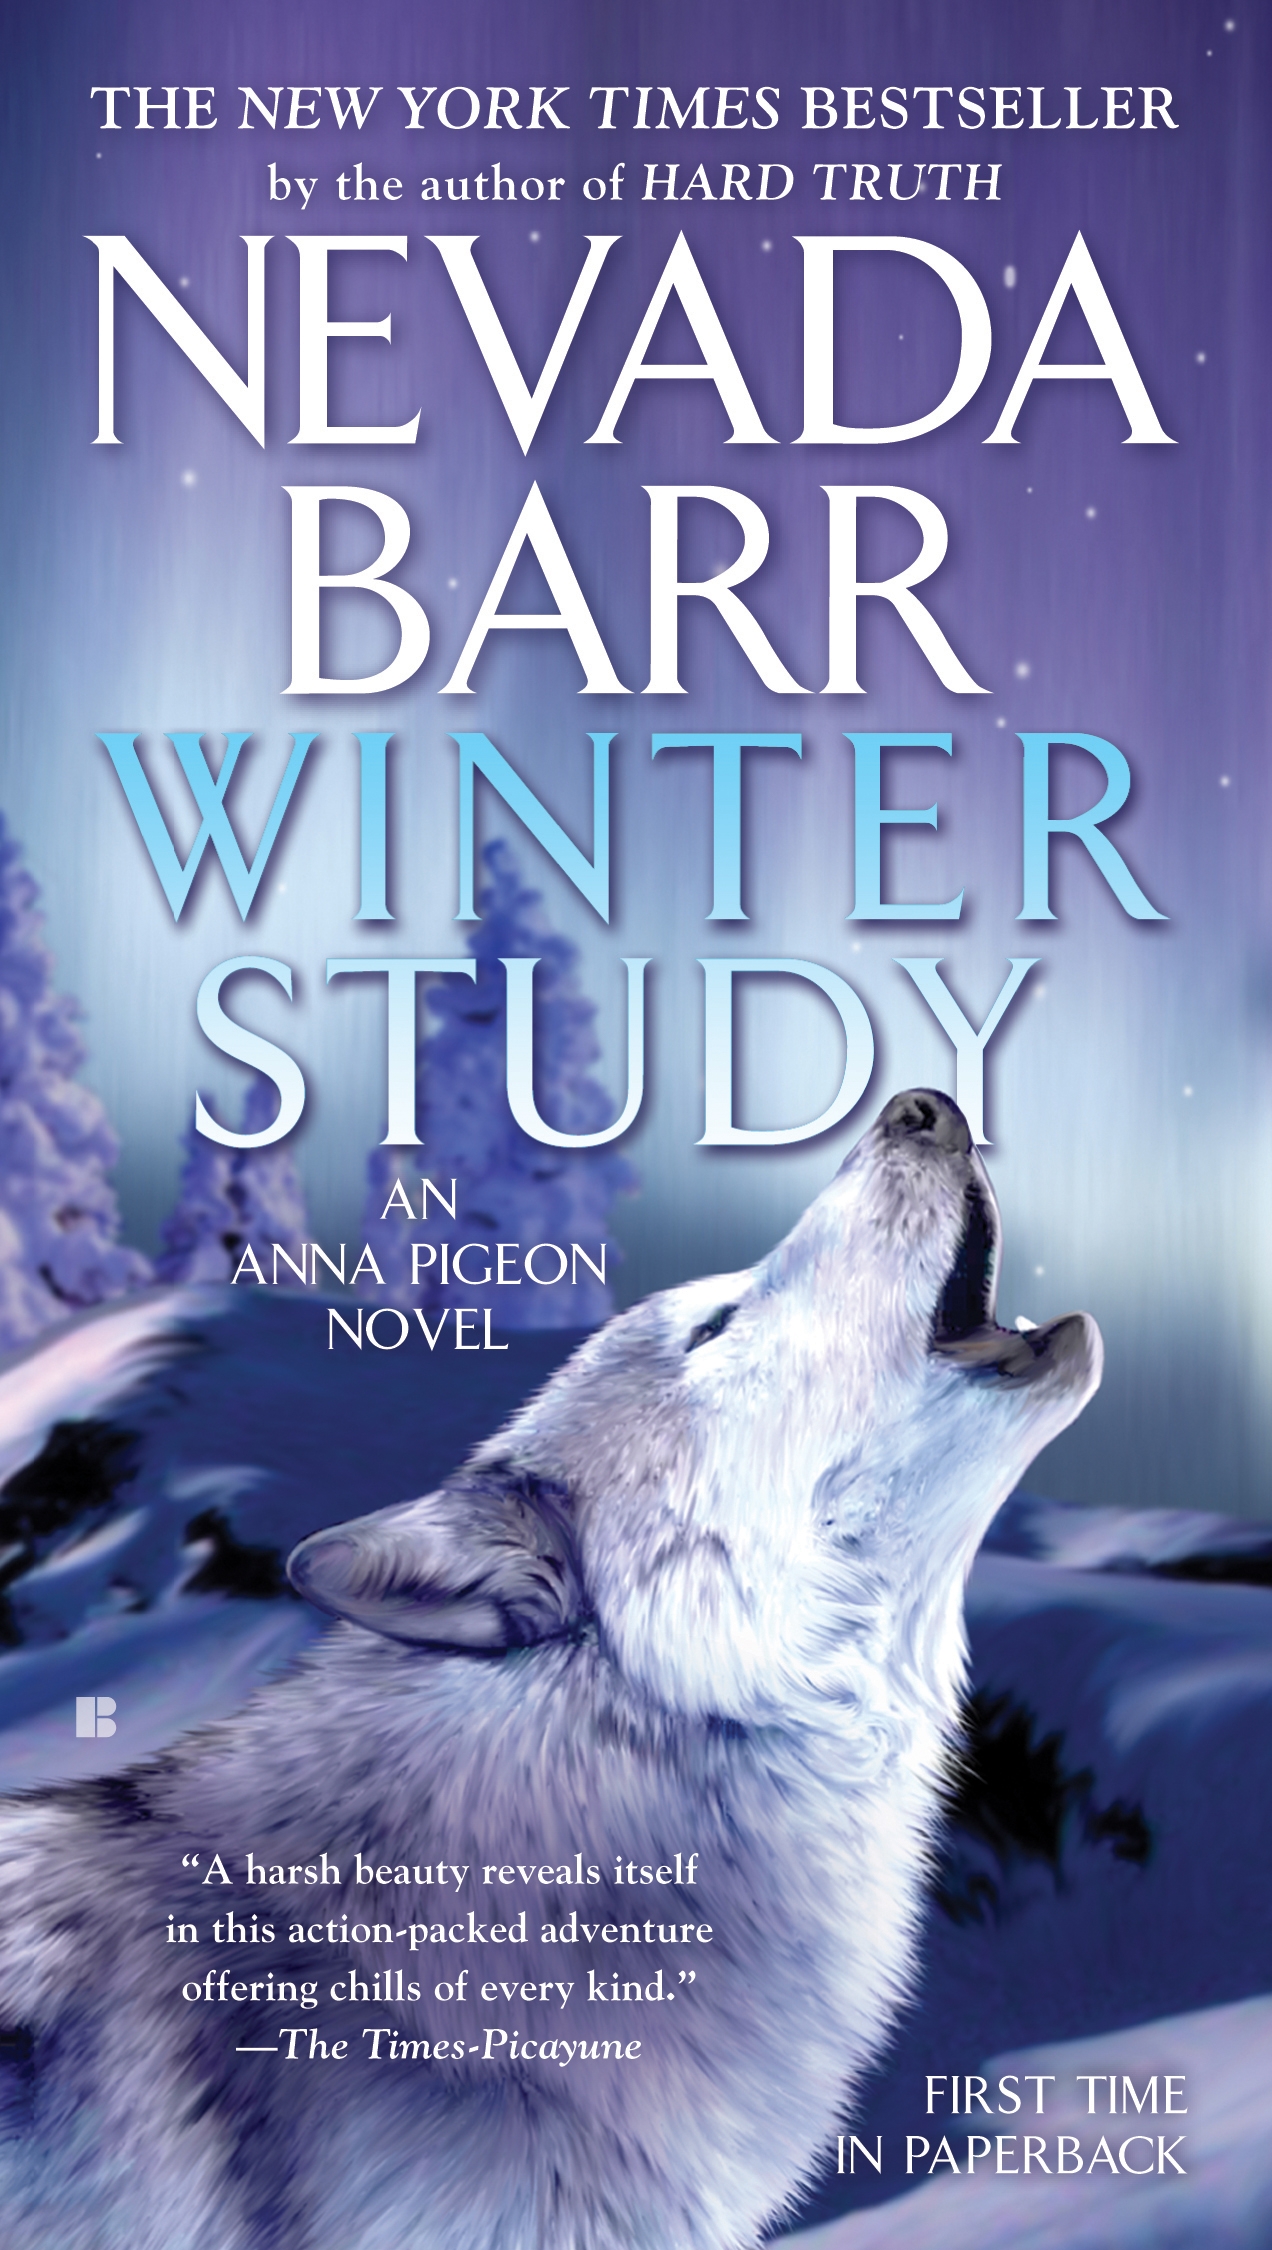 Winter Study Anna Pigeon Mysteries Book 14 By Nevada Barr